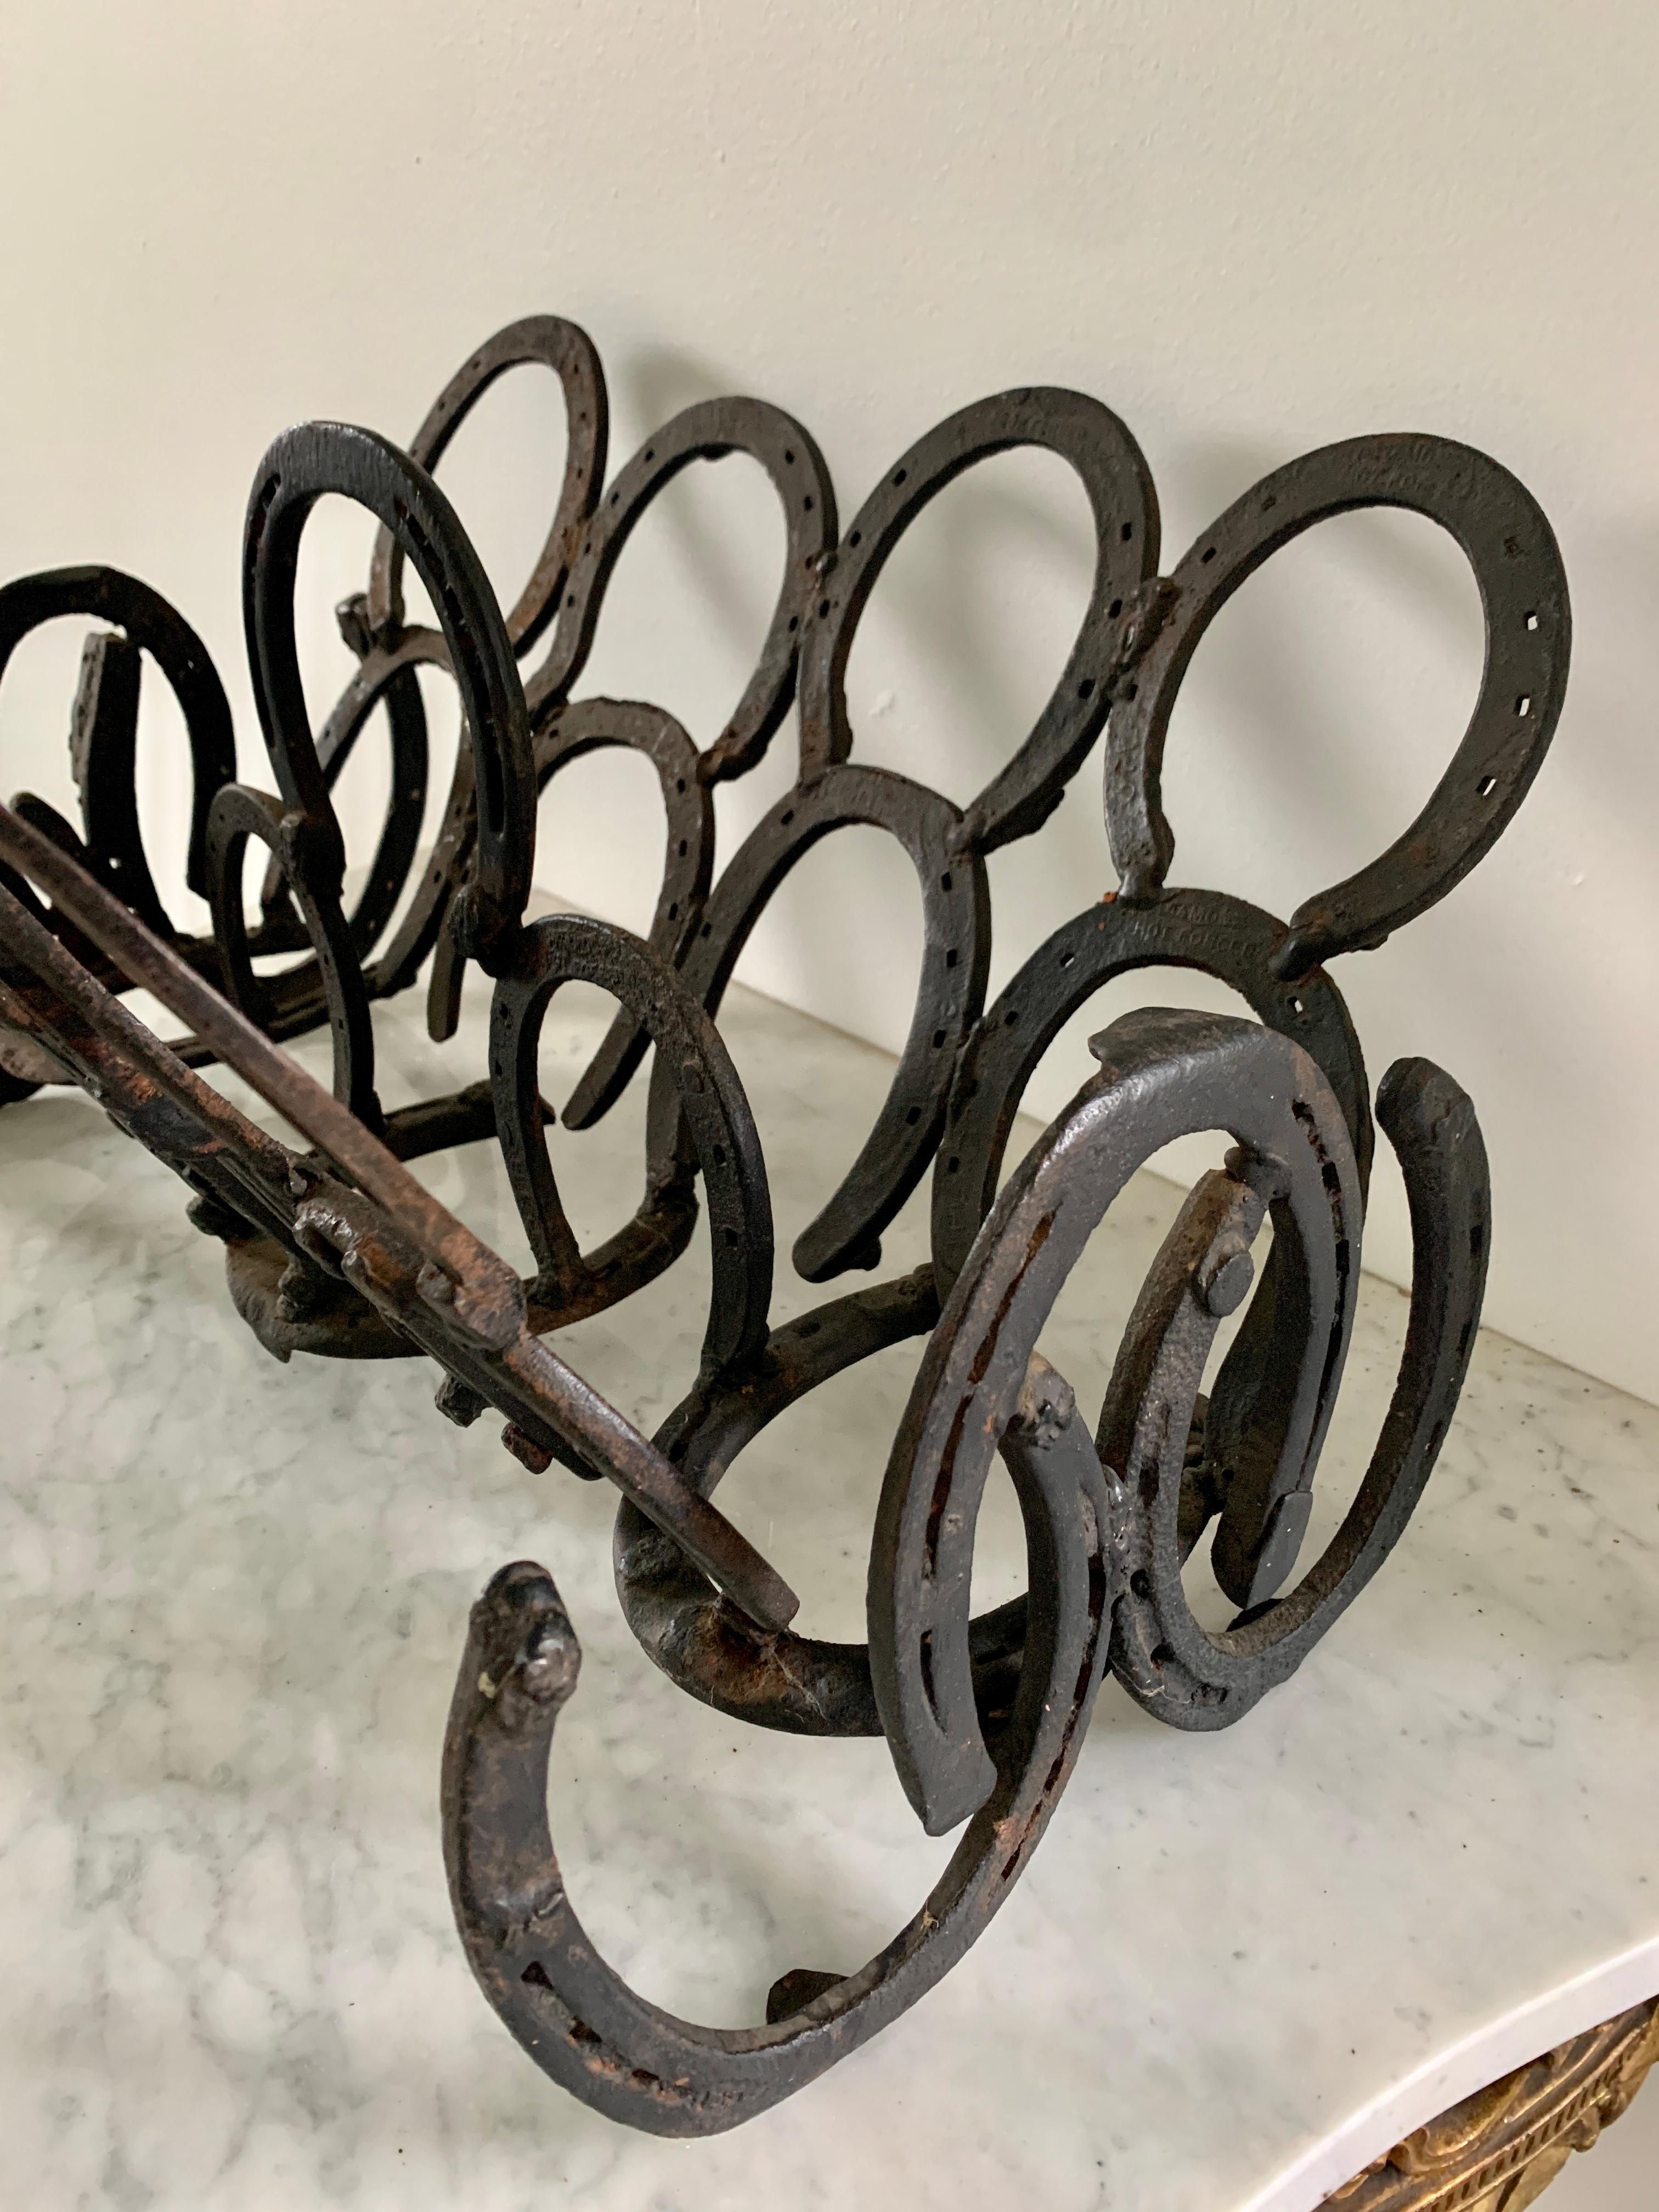 Vintage Equestrian Hand Forged Cast Iron Horseshoe Magazine Rack or Book Stand For Sale 2